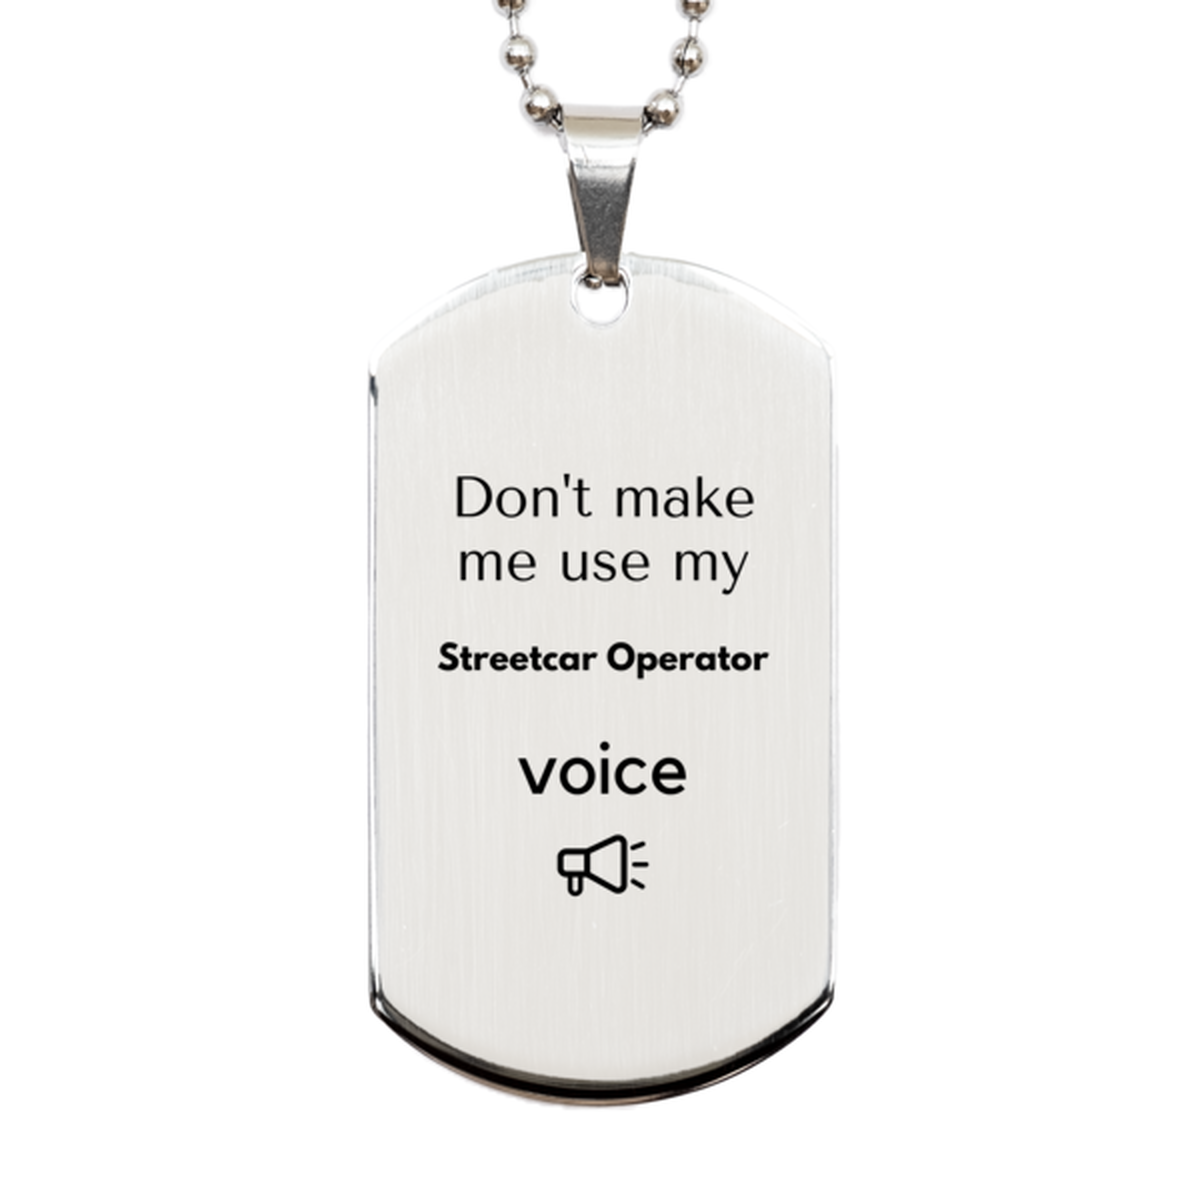 Don't make me use my Streetcar Operator voice, Sarcasm Streetcar Operator Gifts, Christmas Streetcar Operator Silver Dog Tag Birthday Unique Gifts For Streetcar Operator Coworkers, Men, Women, Colleague, Friends